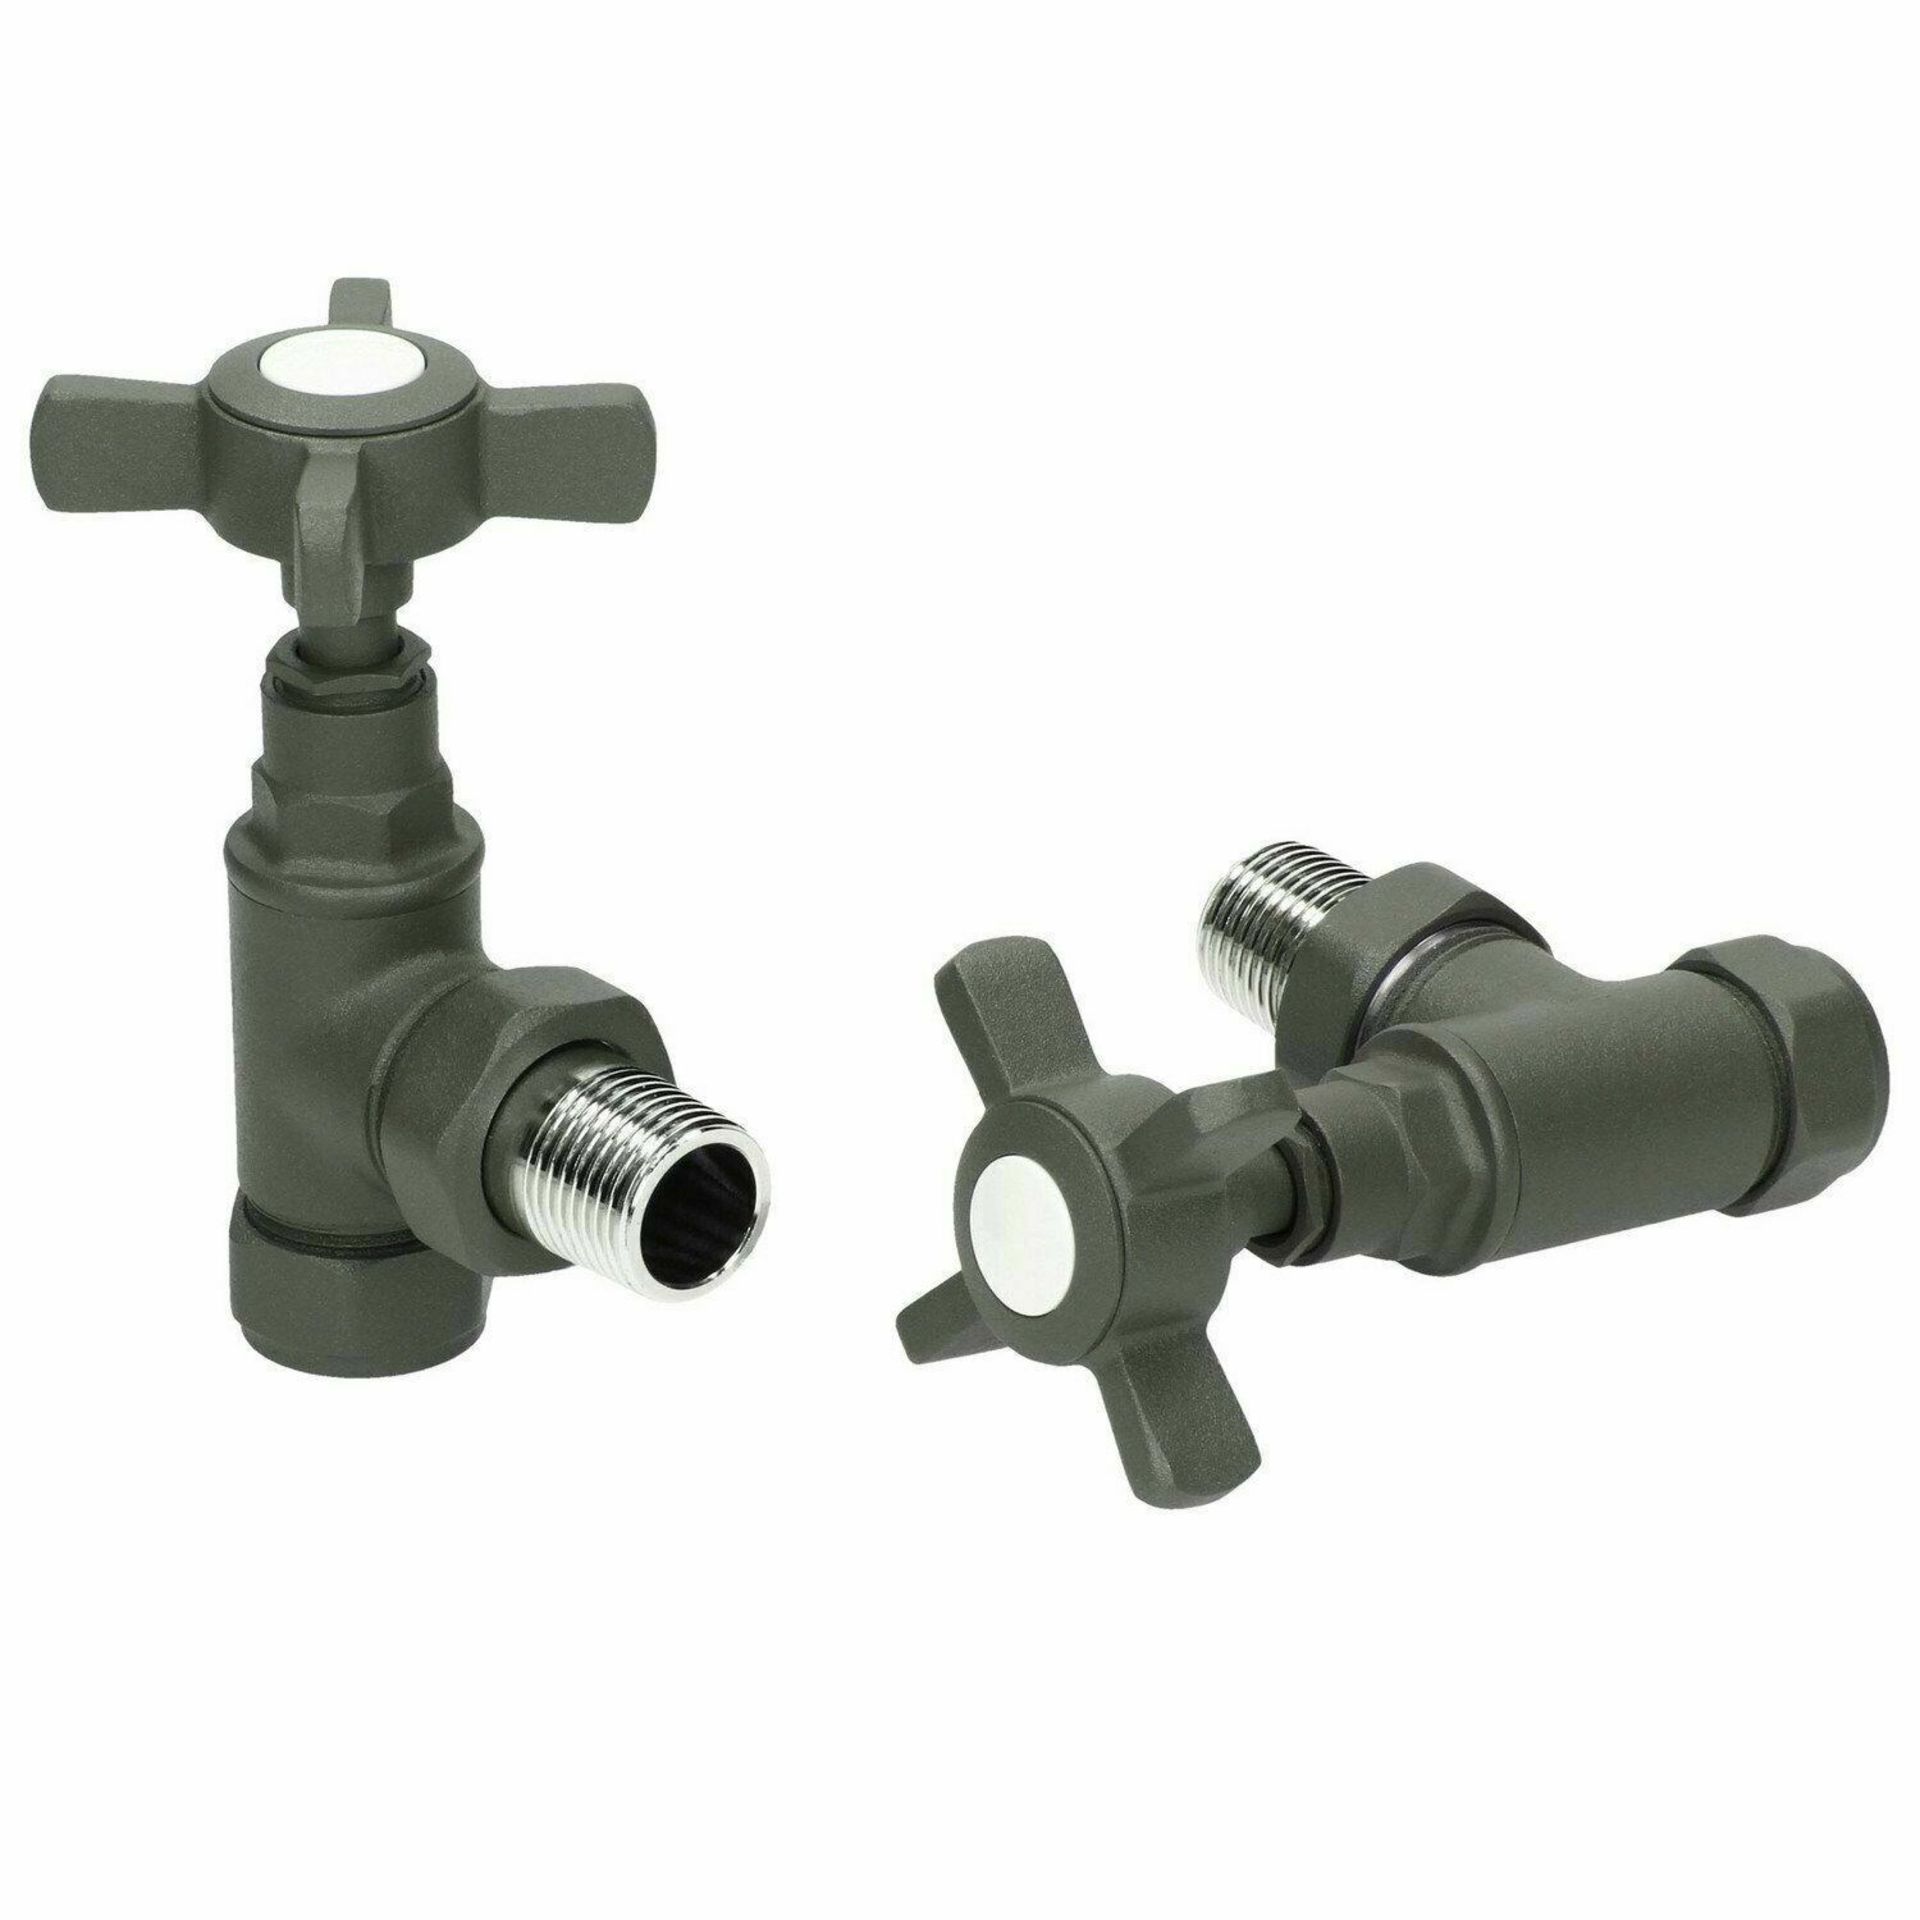 15mm Traditional Angled Heated Towel Rail Radiator Valves Standard Pair Anthracite. Manufactur... - Image 2 of 2